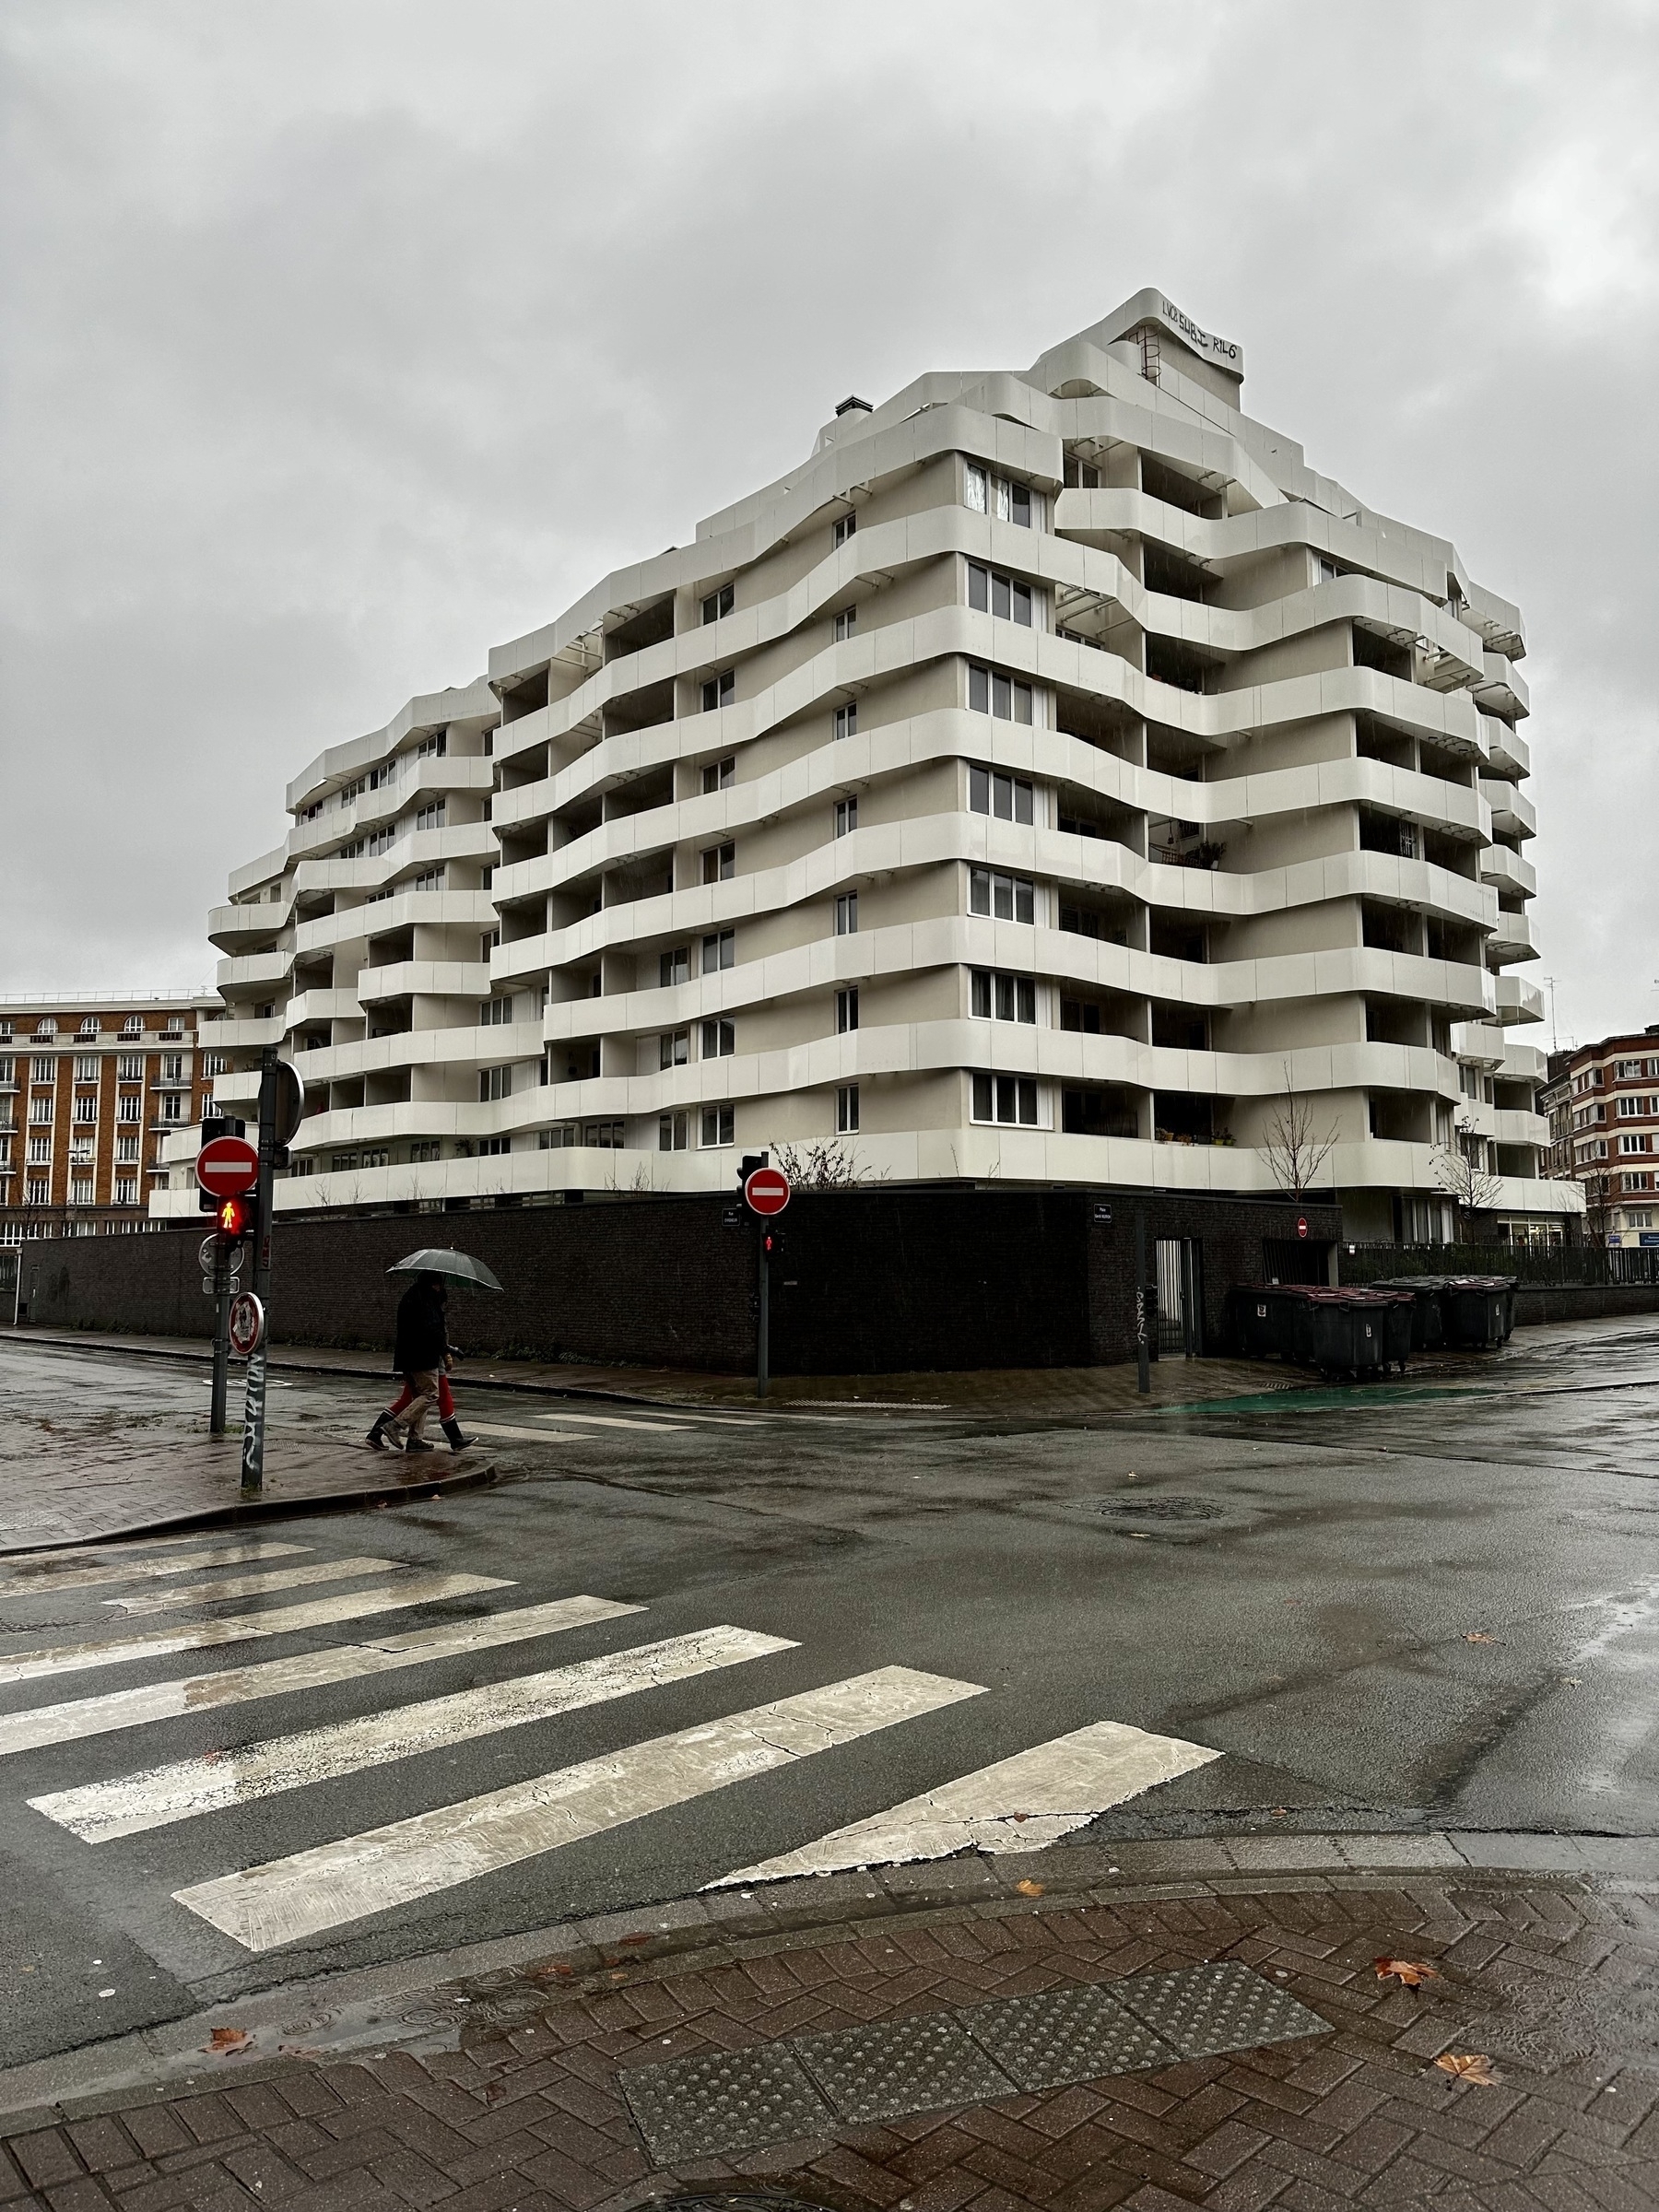 Modern, white appartement building in the rain